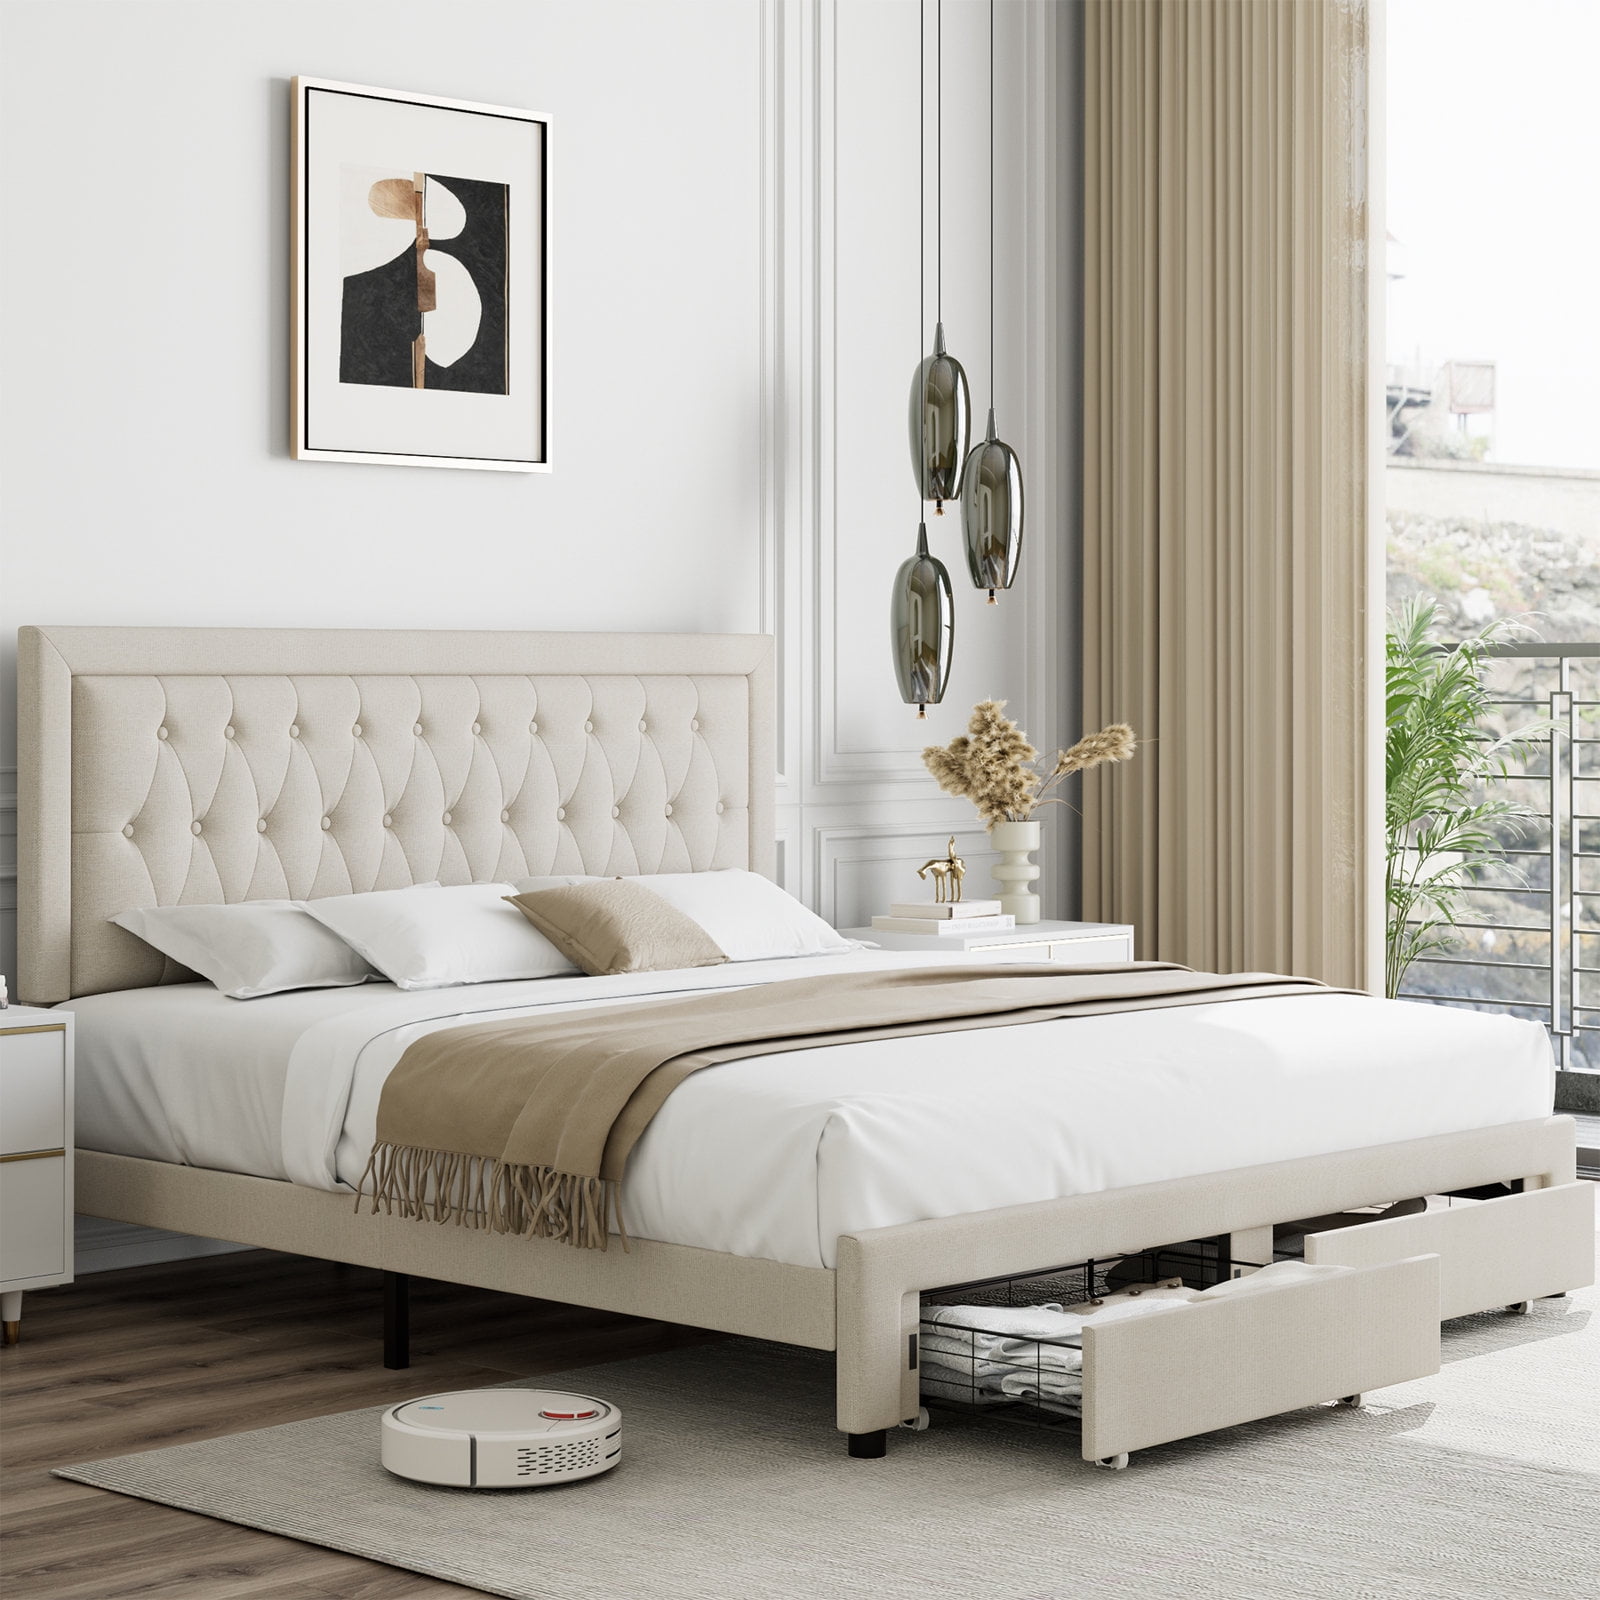 Homfa Queen Size Bed Frame With 2 Drawers, Linen Upholstered Platform Bed  With Adjustable Button Headboard, Beige - Walmart.Com